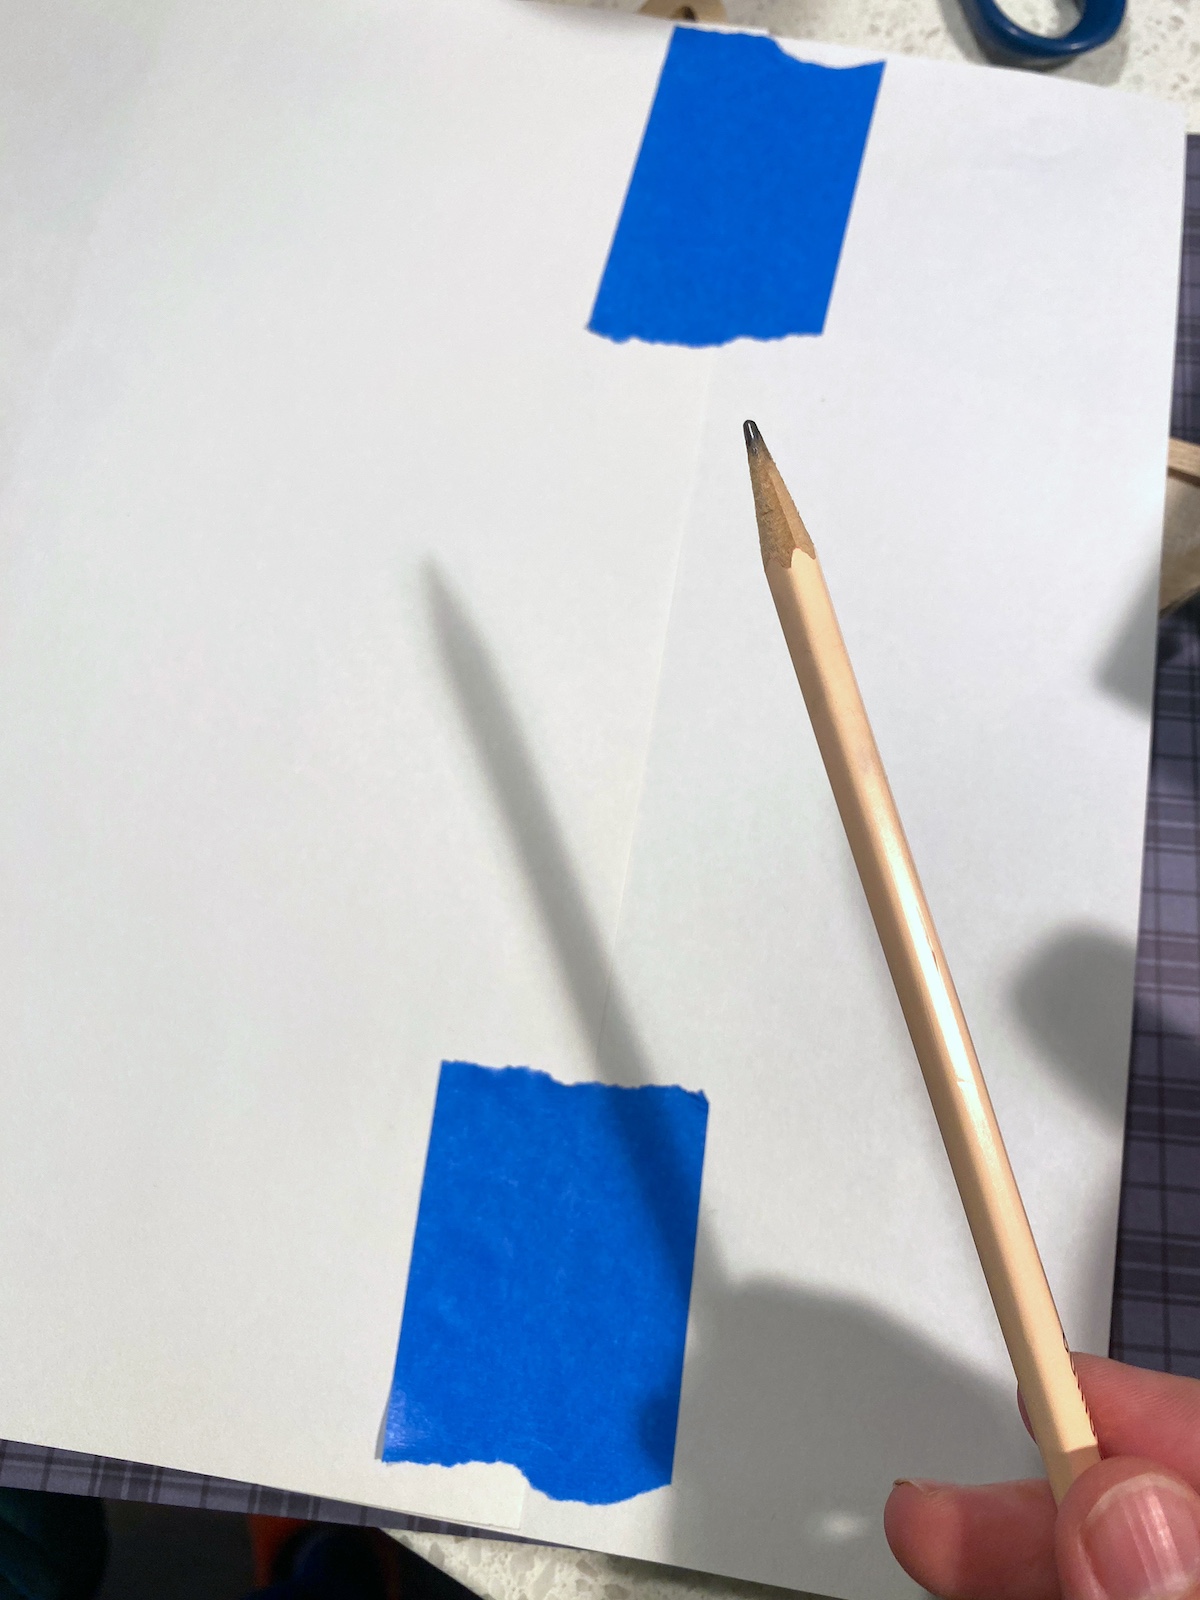 Two pieces of printer paper taped together with painter's tape